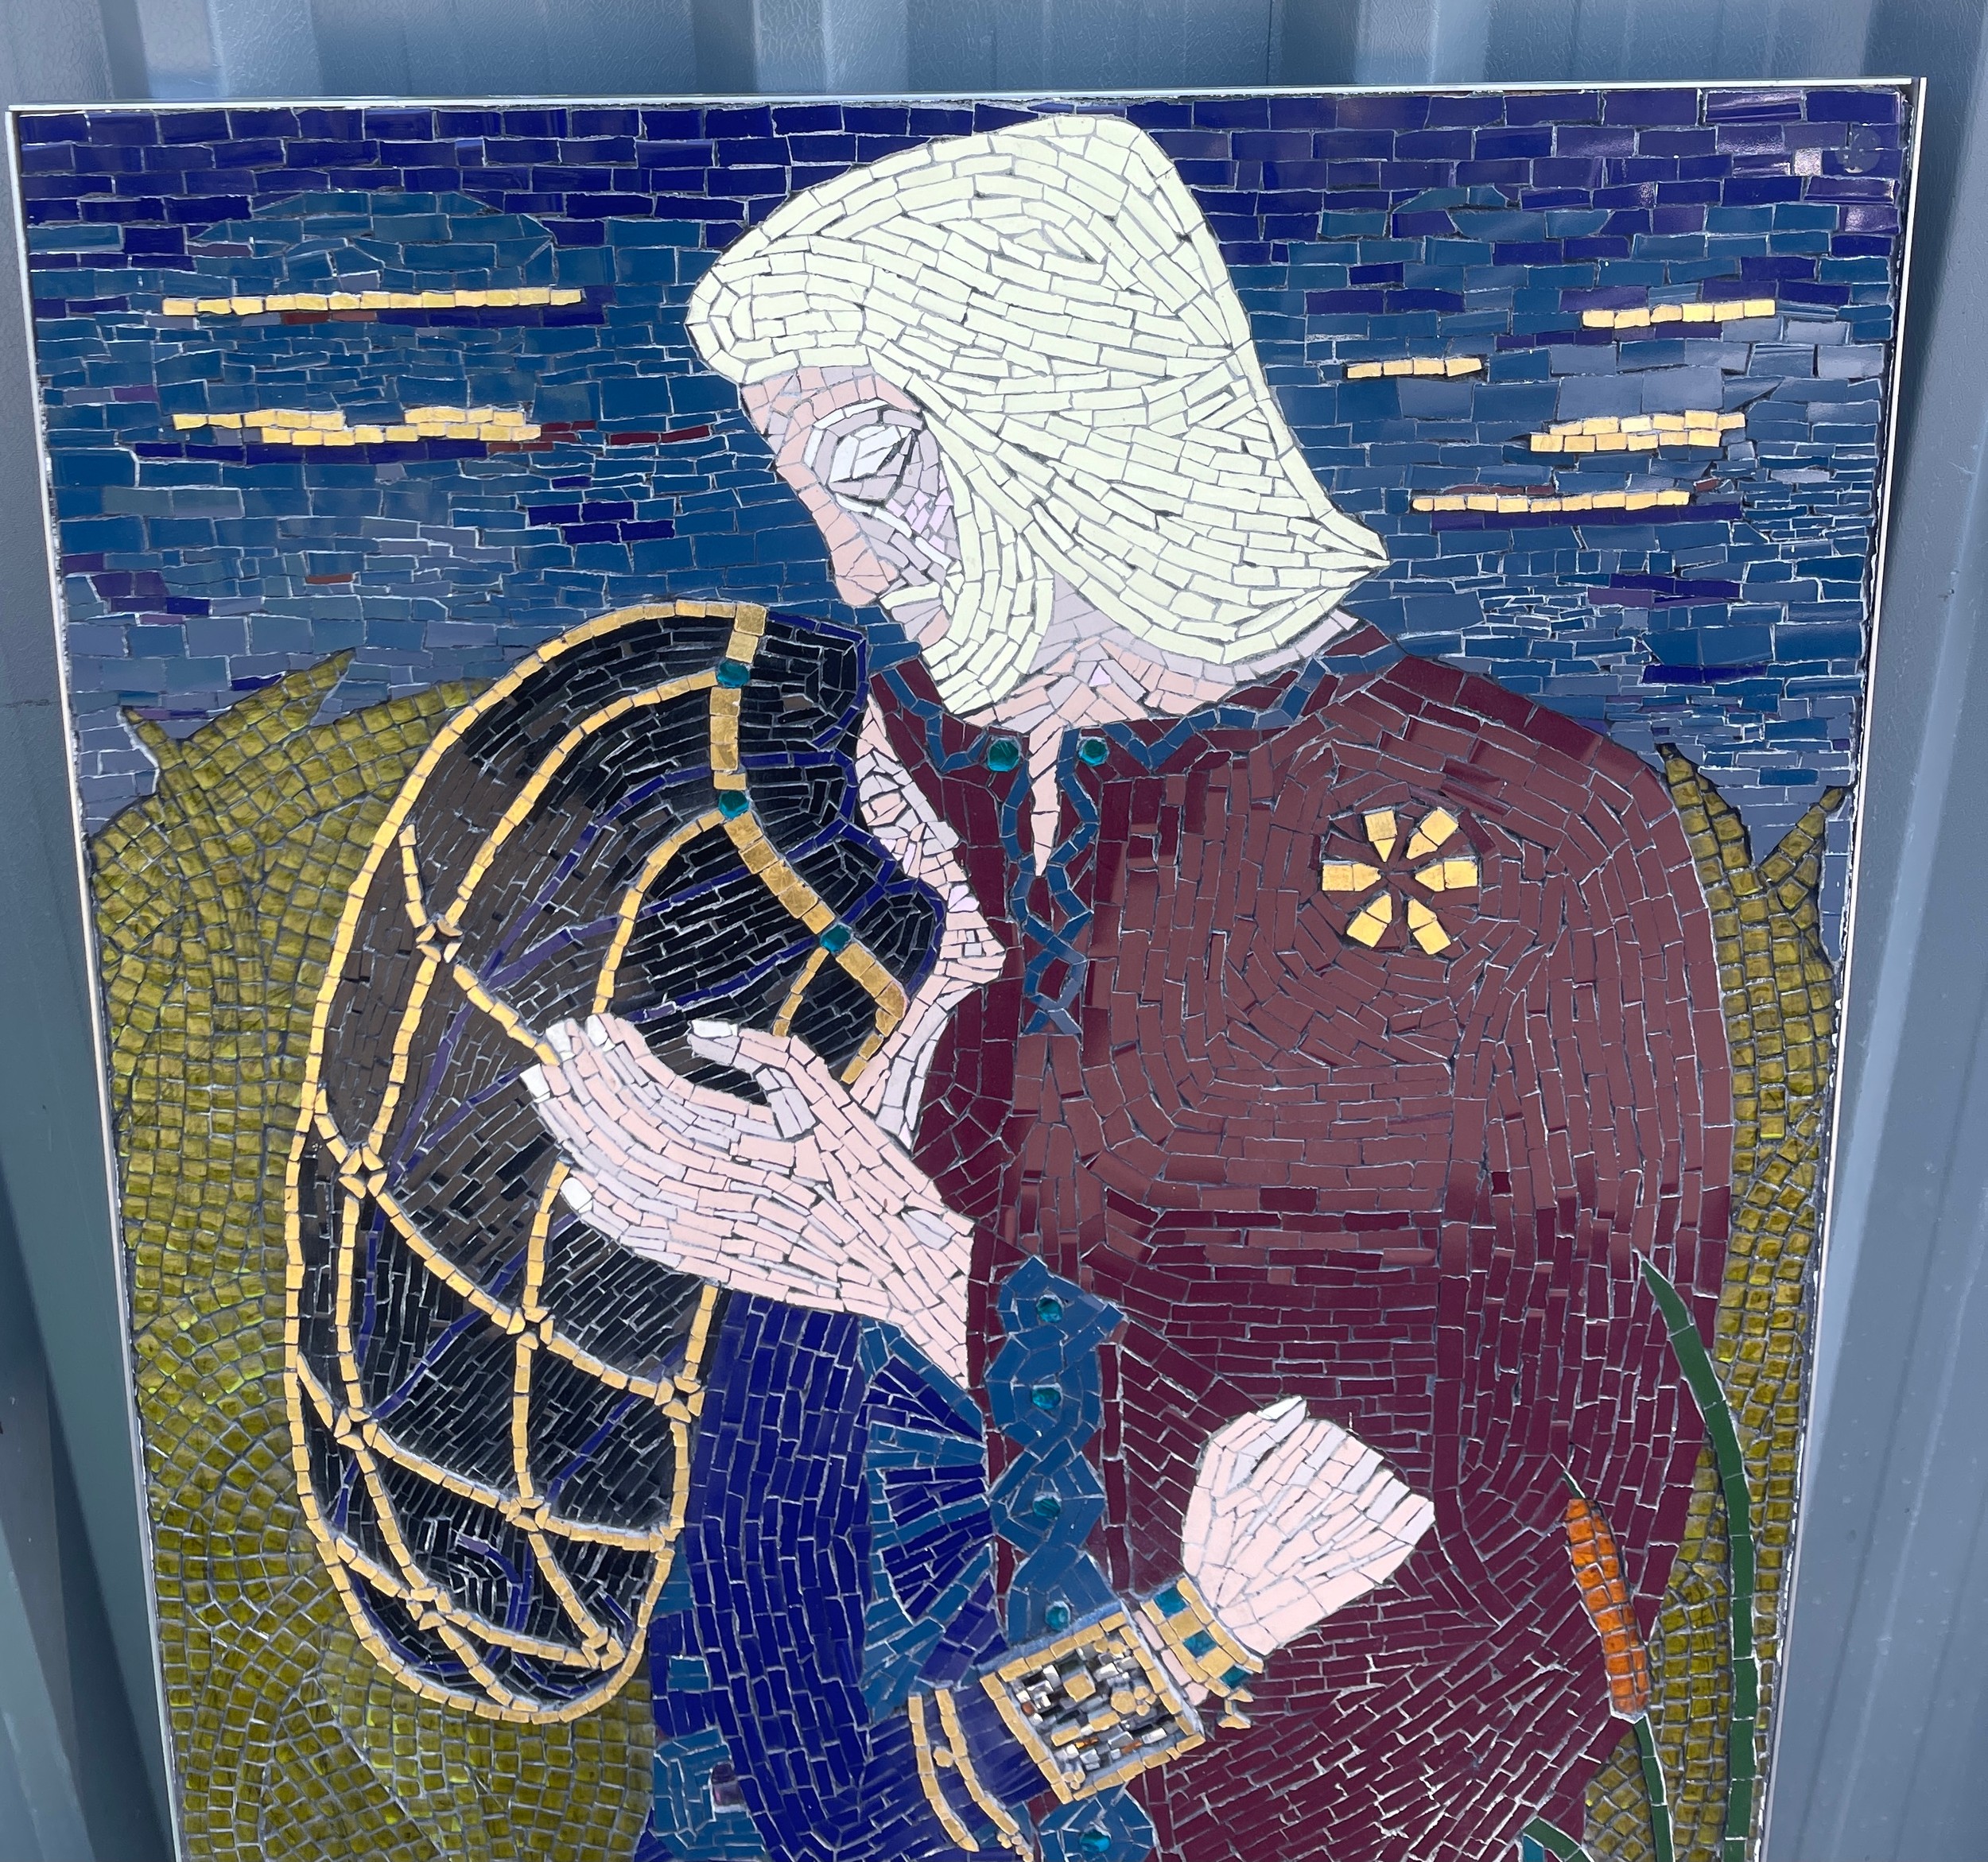 Large mosaic picture measures approx 48 inches tall by 24 inches tall - Image 4 of 4